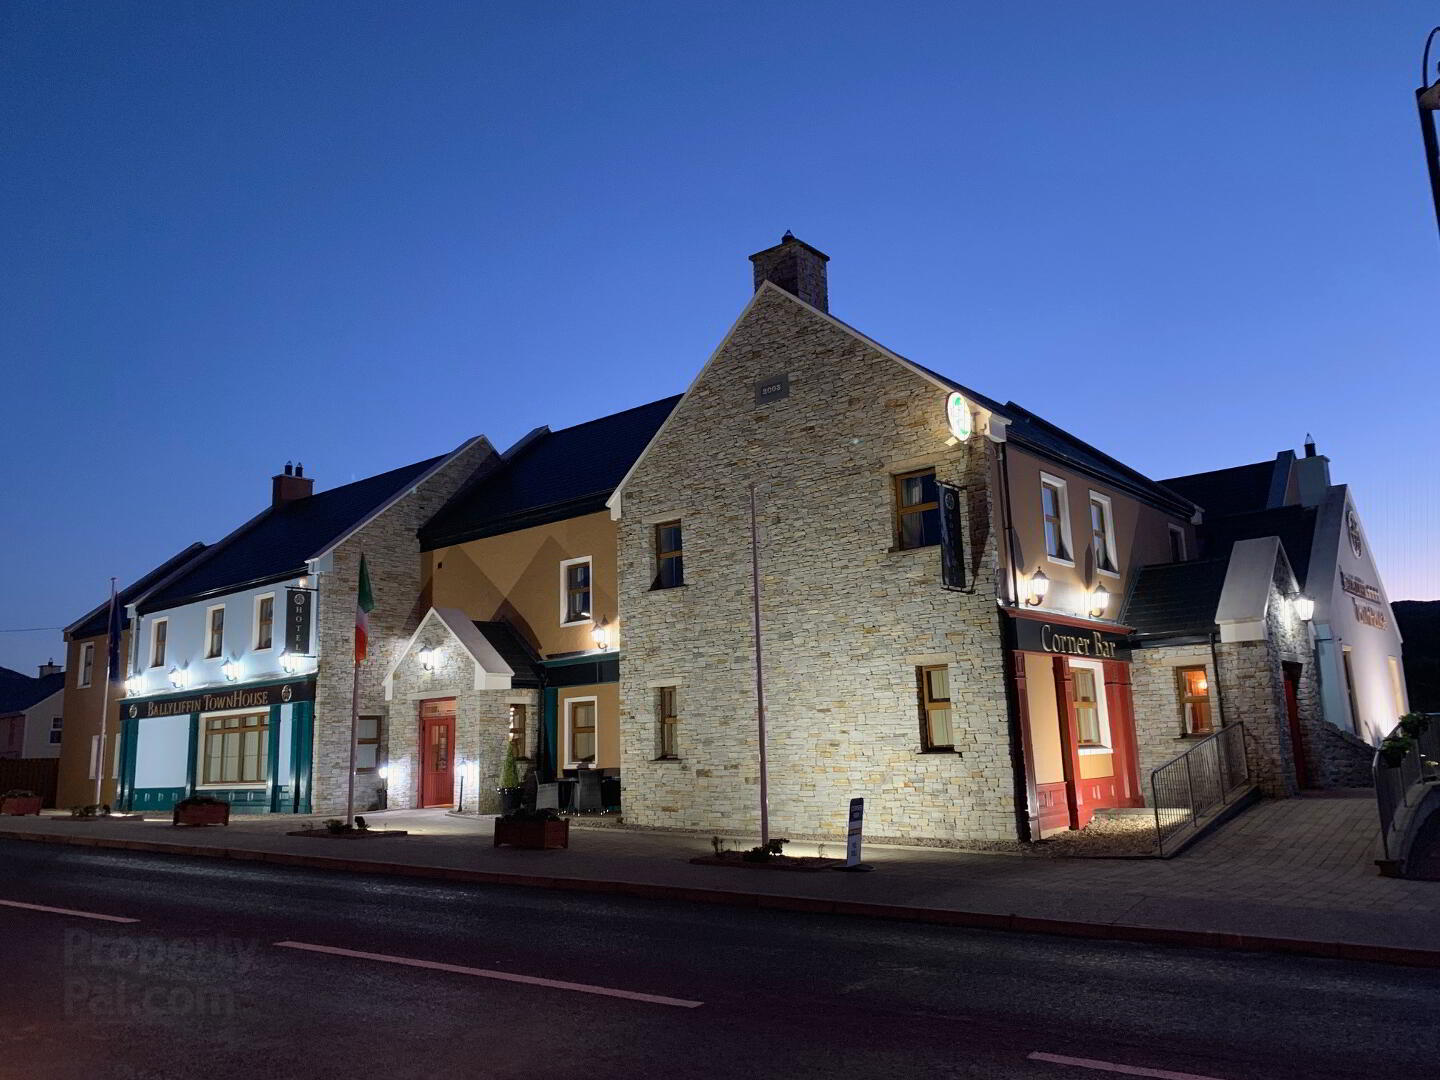 Ballyliffin Townhouse & Spa, St James Ct